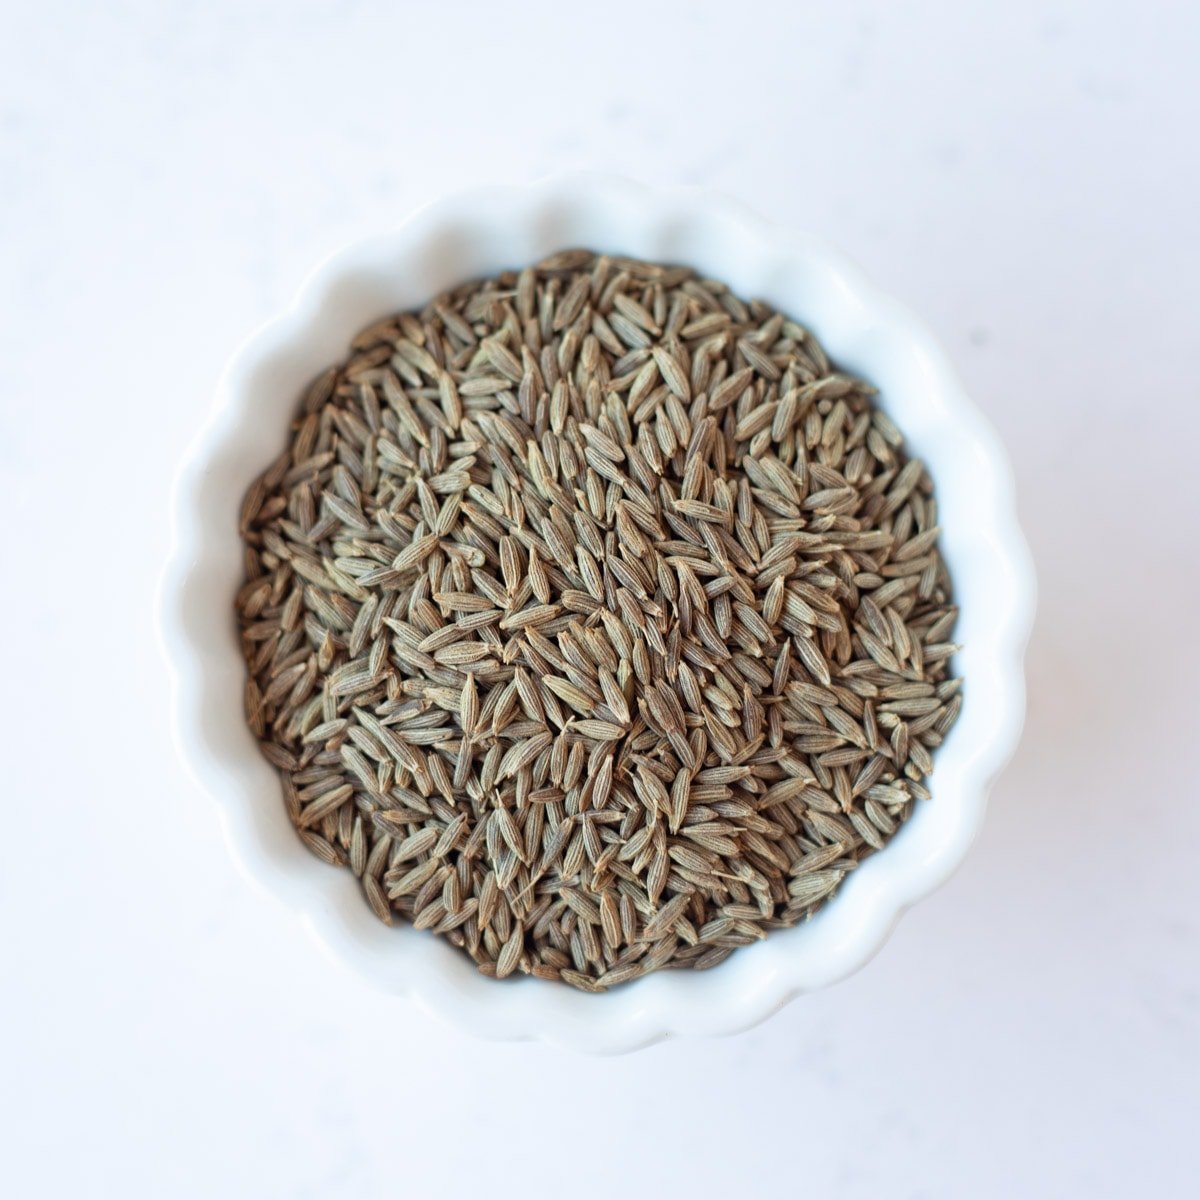 Cumin seeds in a white small bowl